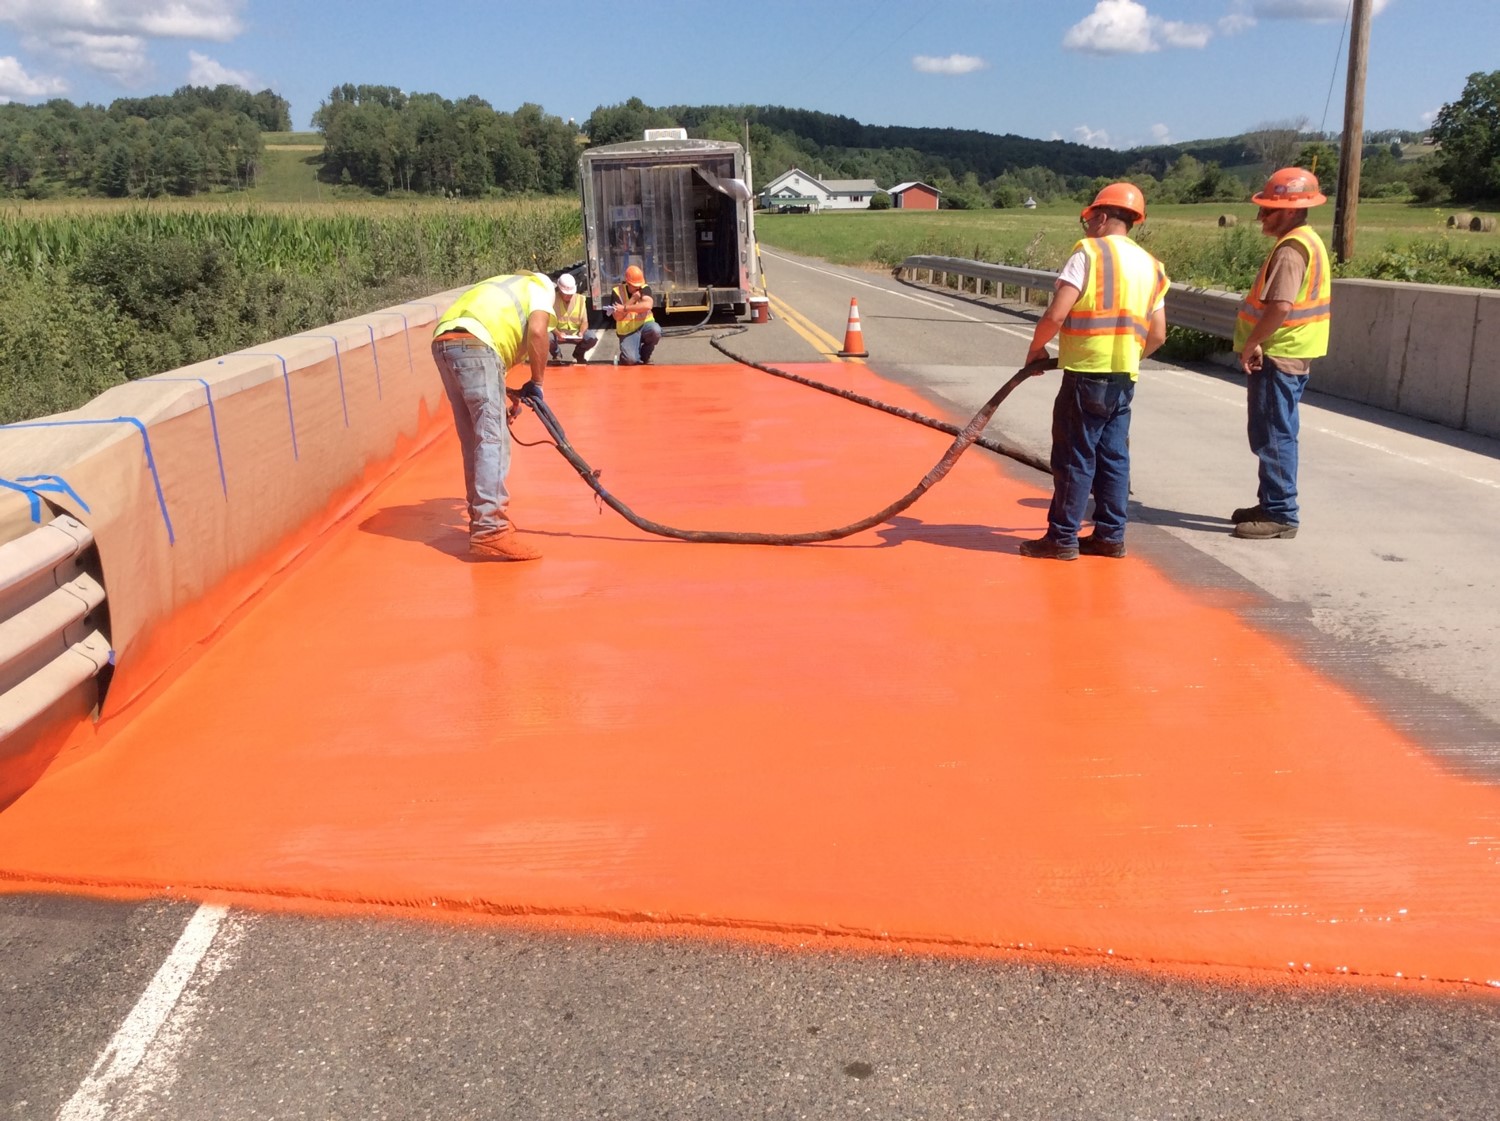 An image of three construction workers in hard hats and yellow safety vests using a sprayer to apply an orange waterproof coating to a bridge deck